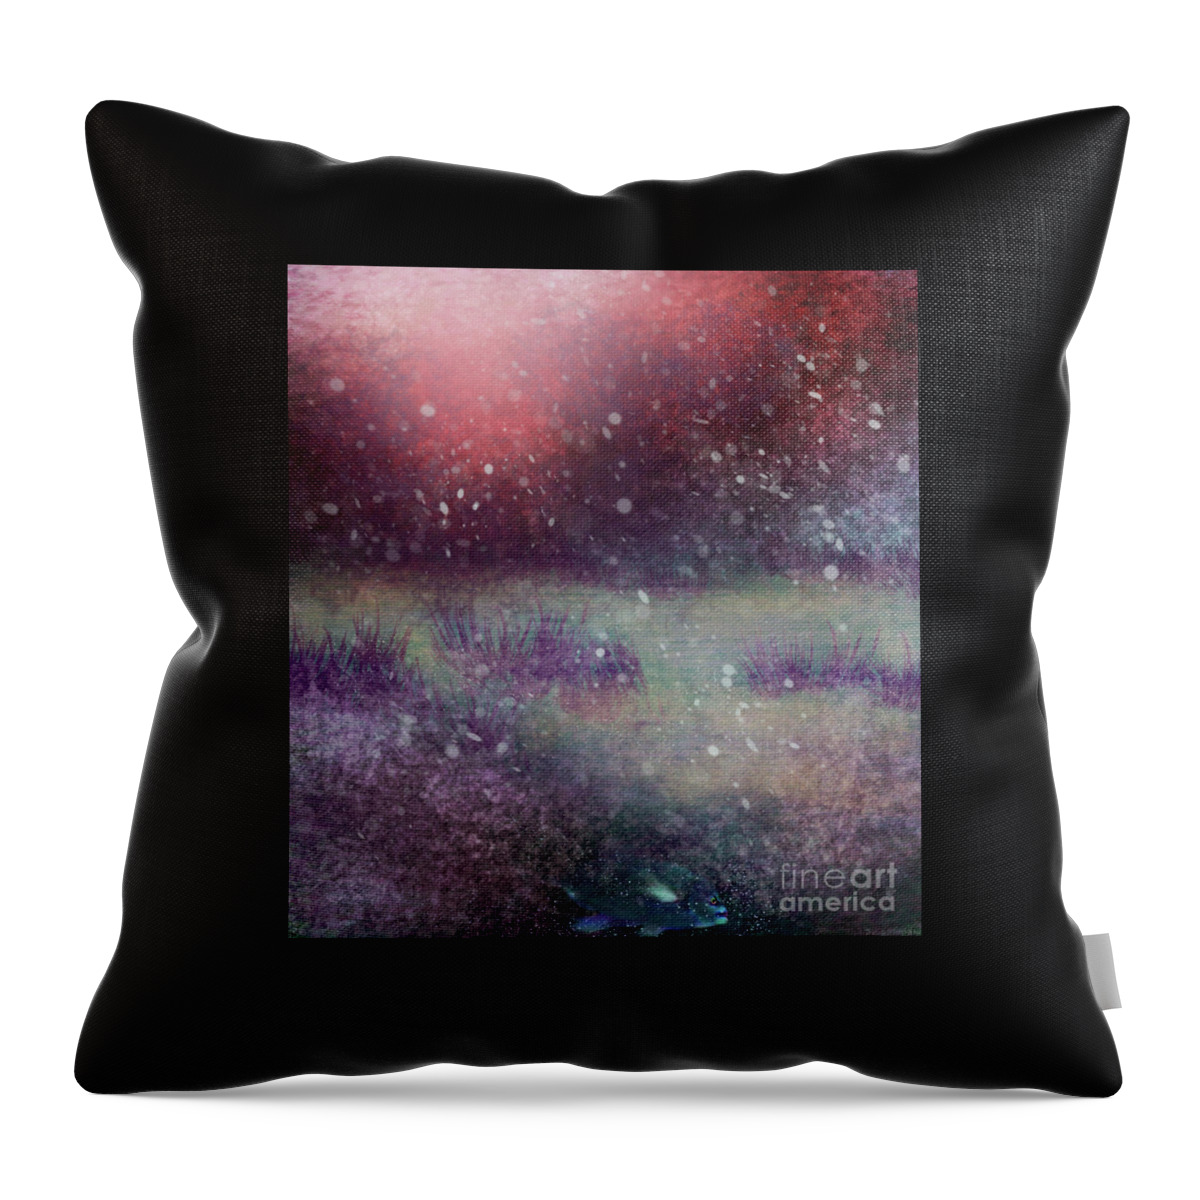 Christmas Throw Pillow featuring the digital art Sixteen Day's To Christmas 2020 by Julie Grimshaw